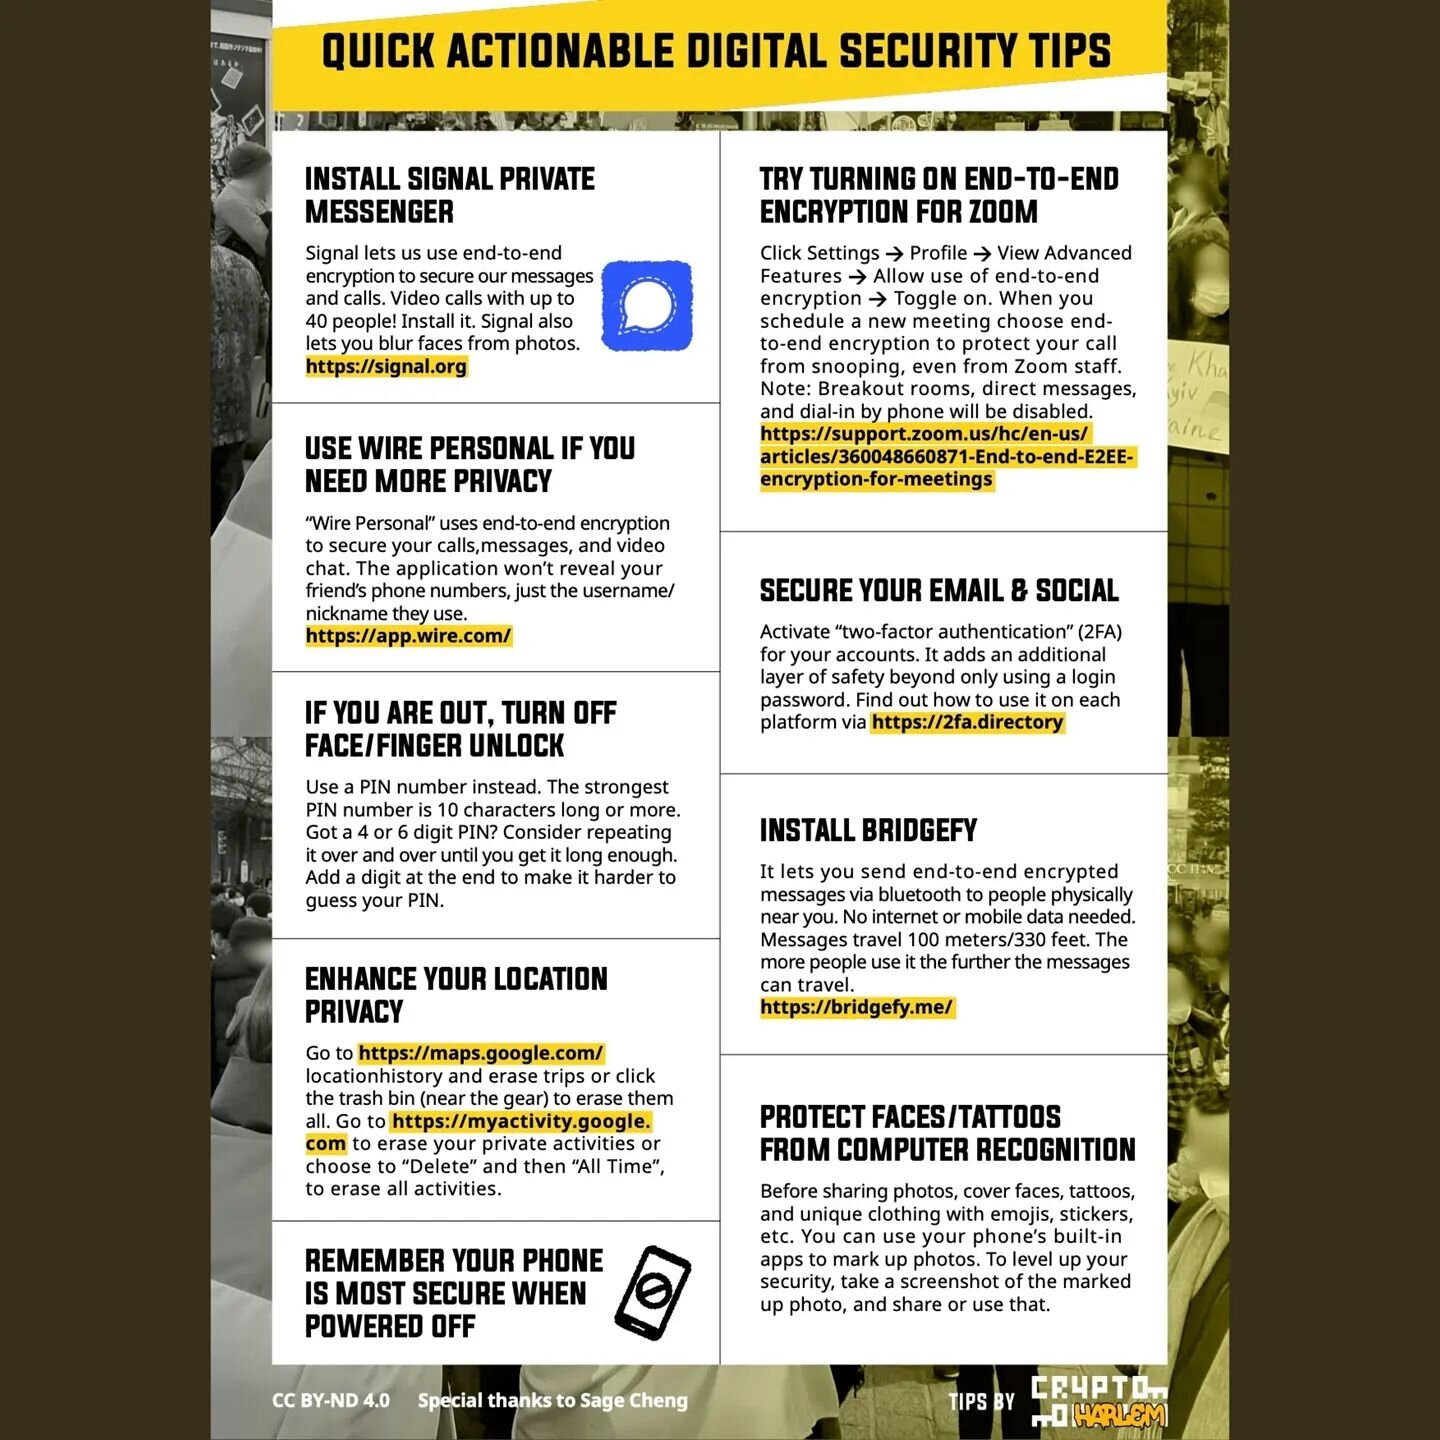 PLEASE SHARE: &quot;Quick Actionable Digital Security tips&quot; (2022) English / Ukrainian / Russian . Peace to all sentient beings. PDF at https://cryptoharlem.com/resources Thank you @Knythrou @nsamarin, sage cheng, &amp; the rest of the team of v